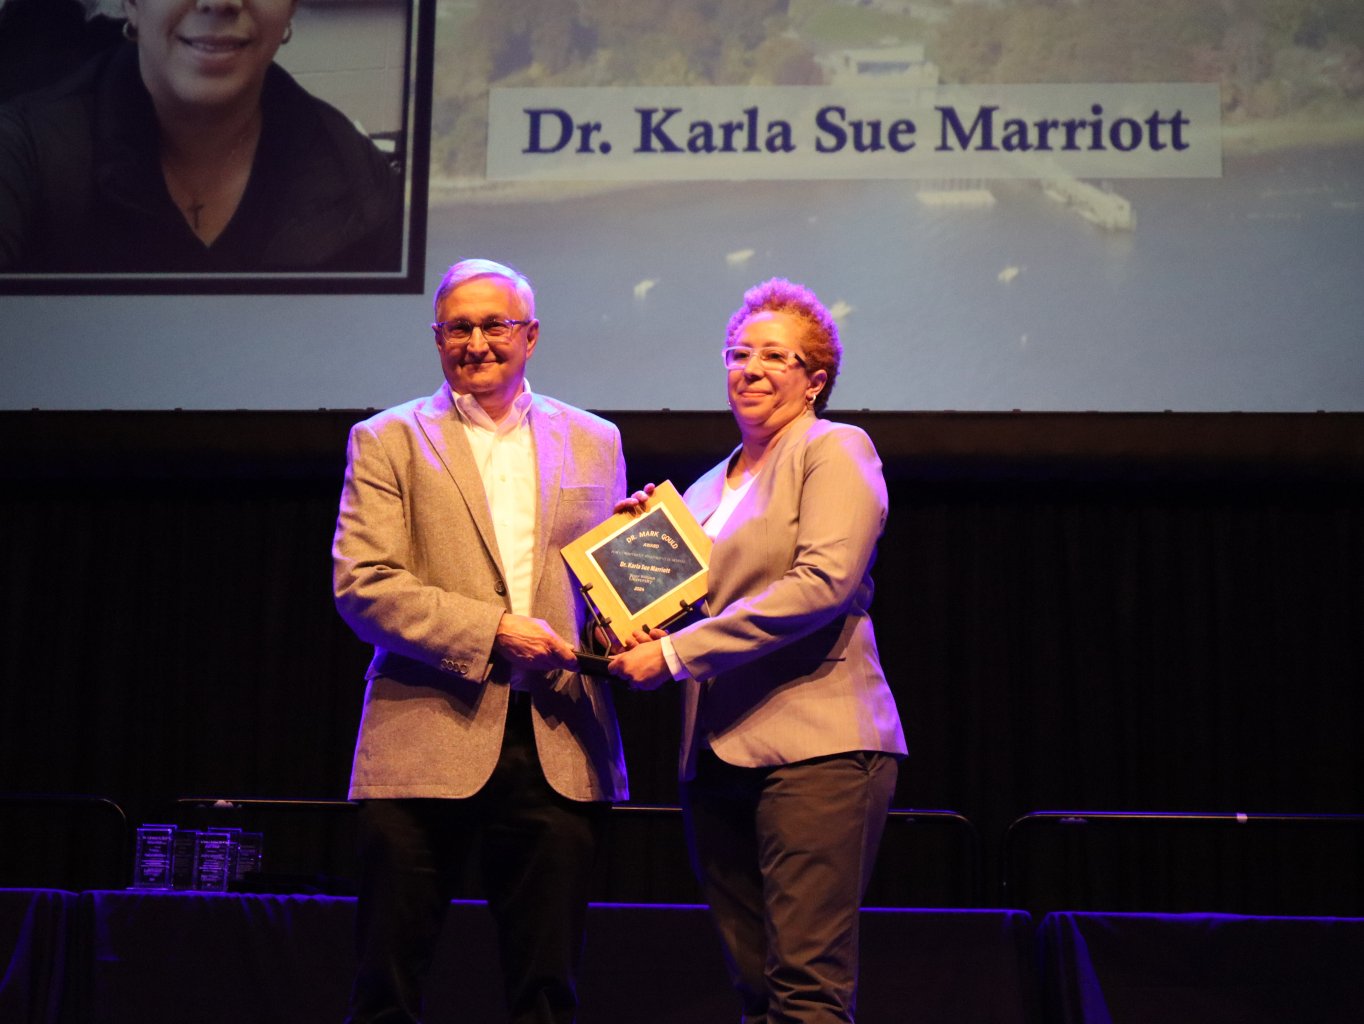 Professor Karla-Sue Marriott receives the Dr. Mark Gould Commitment to Student Learning Award from Interim Dean and Director of the School of Justice Studies David Lambert.